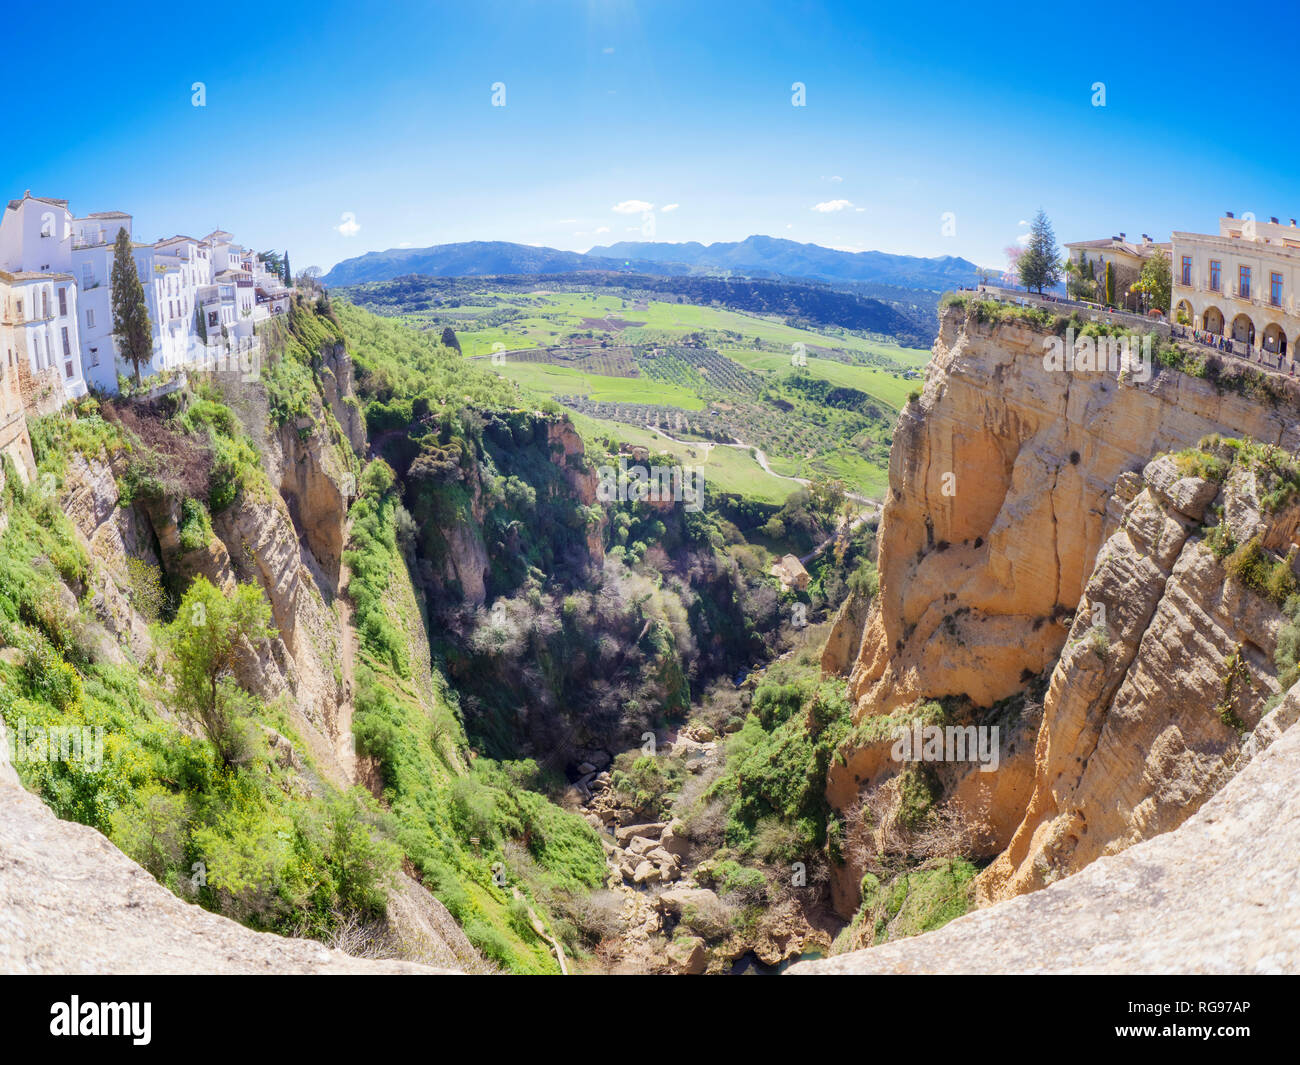 Spain, Andalusia, Ronda, wide angle view Stock Photo